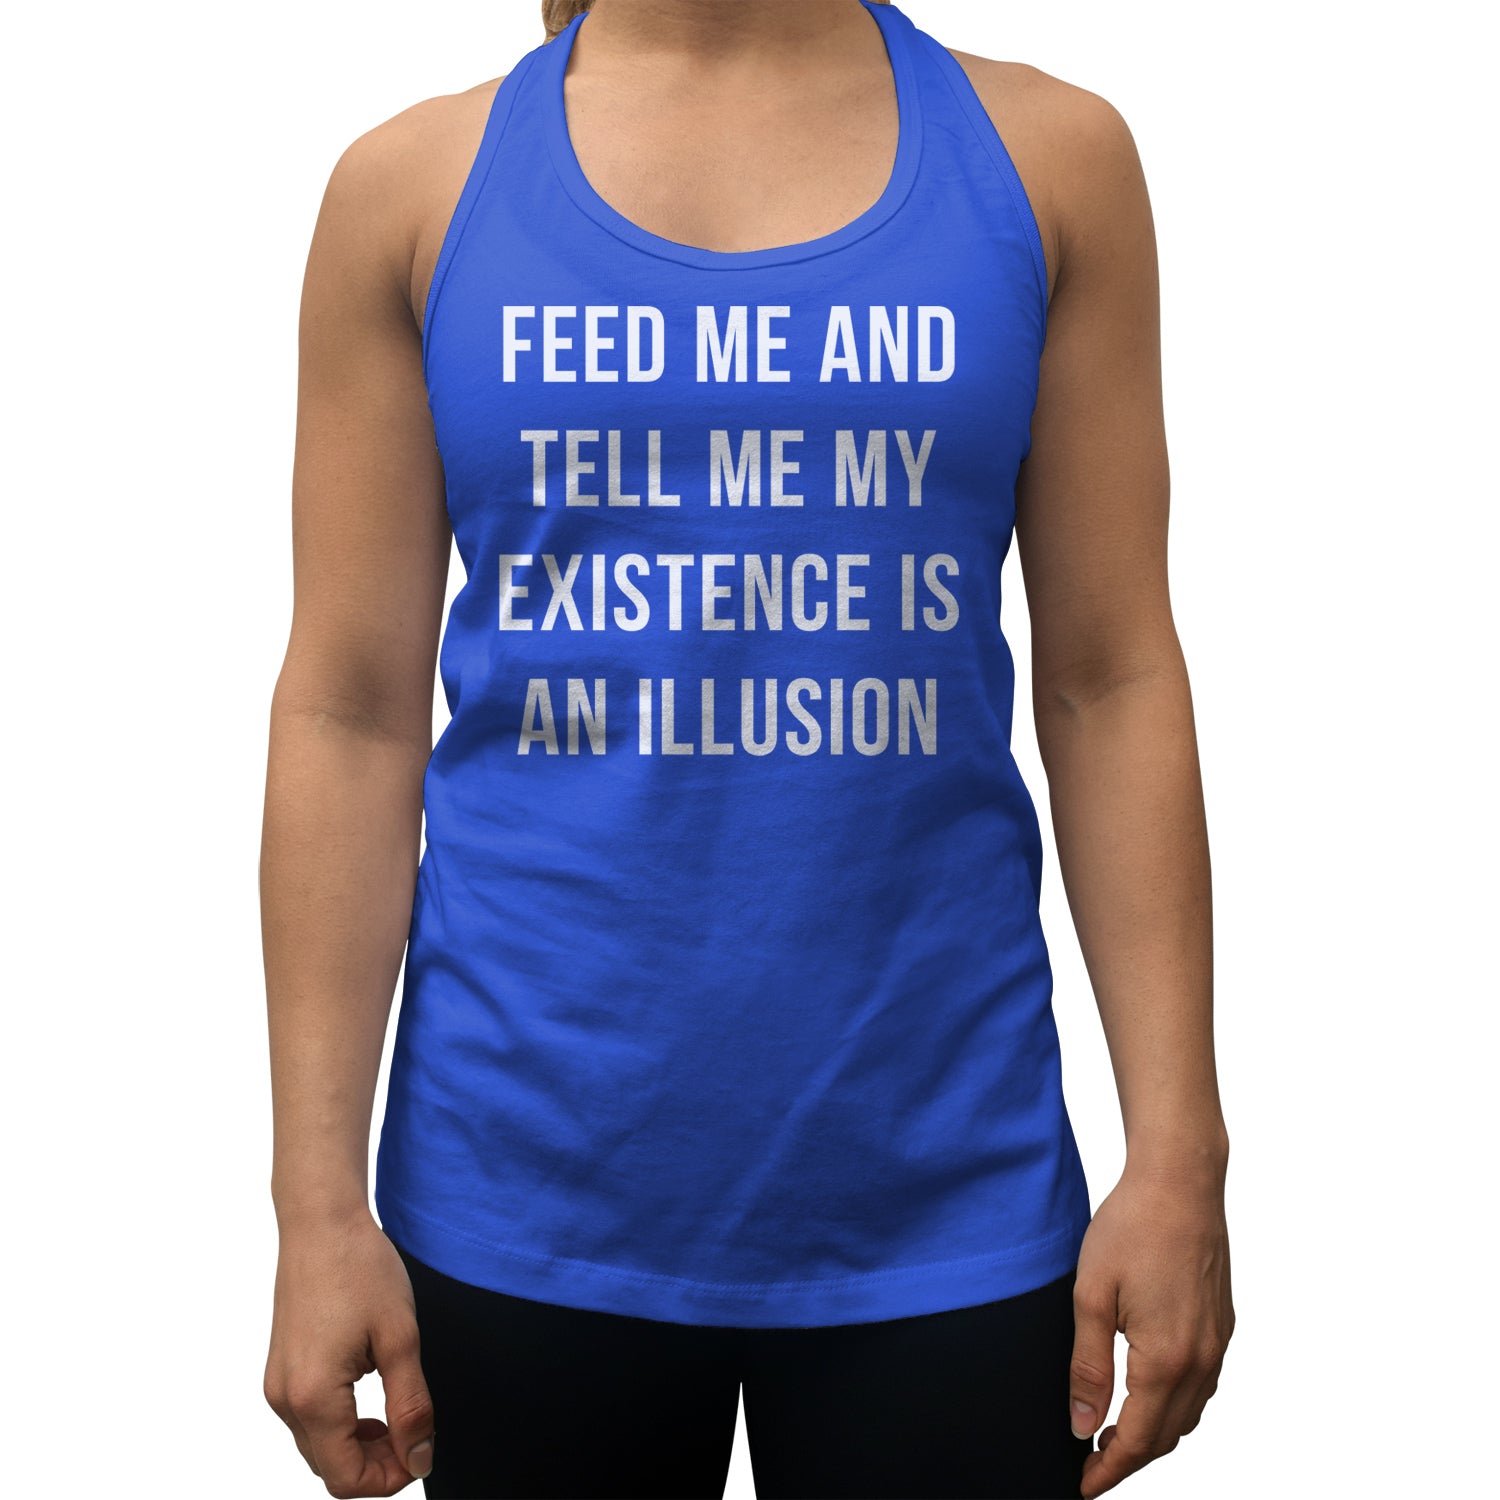 Women's Feed Me and Tell Me My Existence is an Illusion Racerback Tank Top